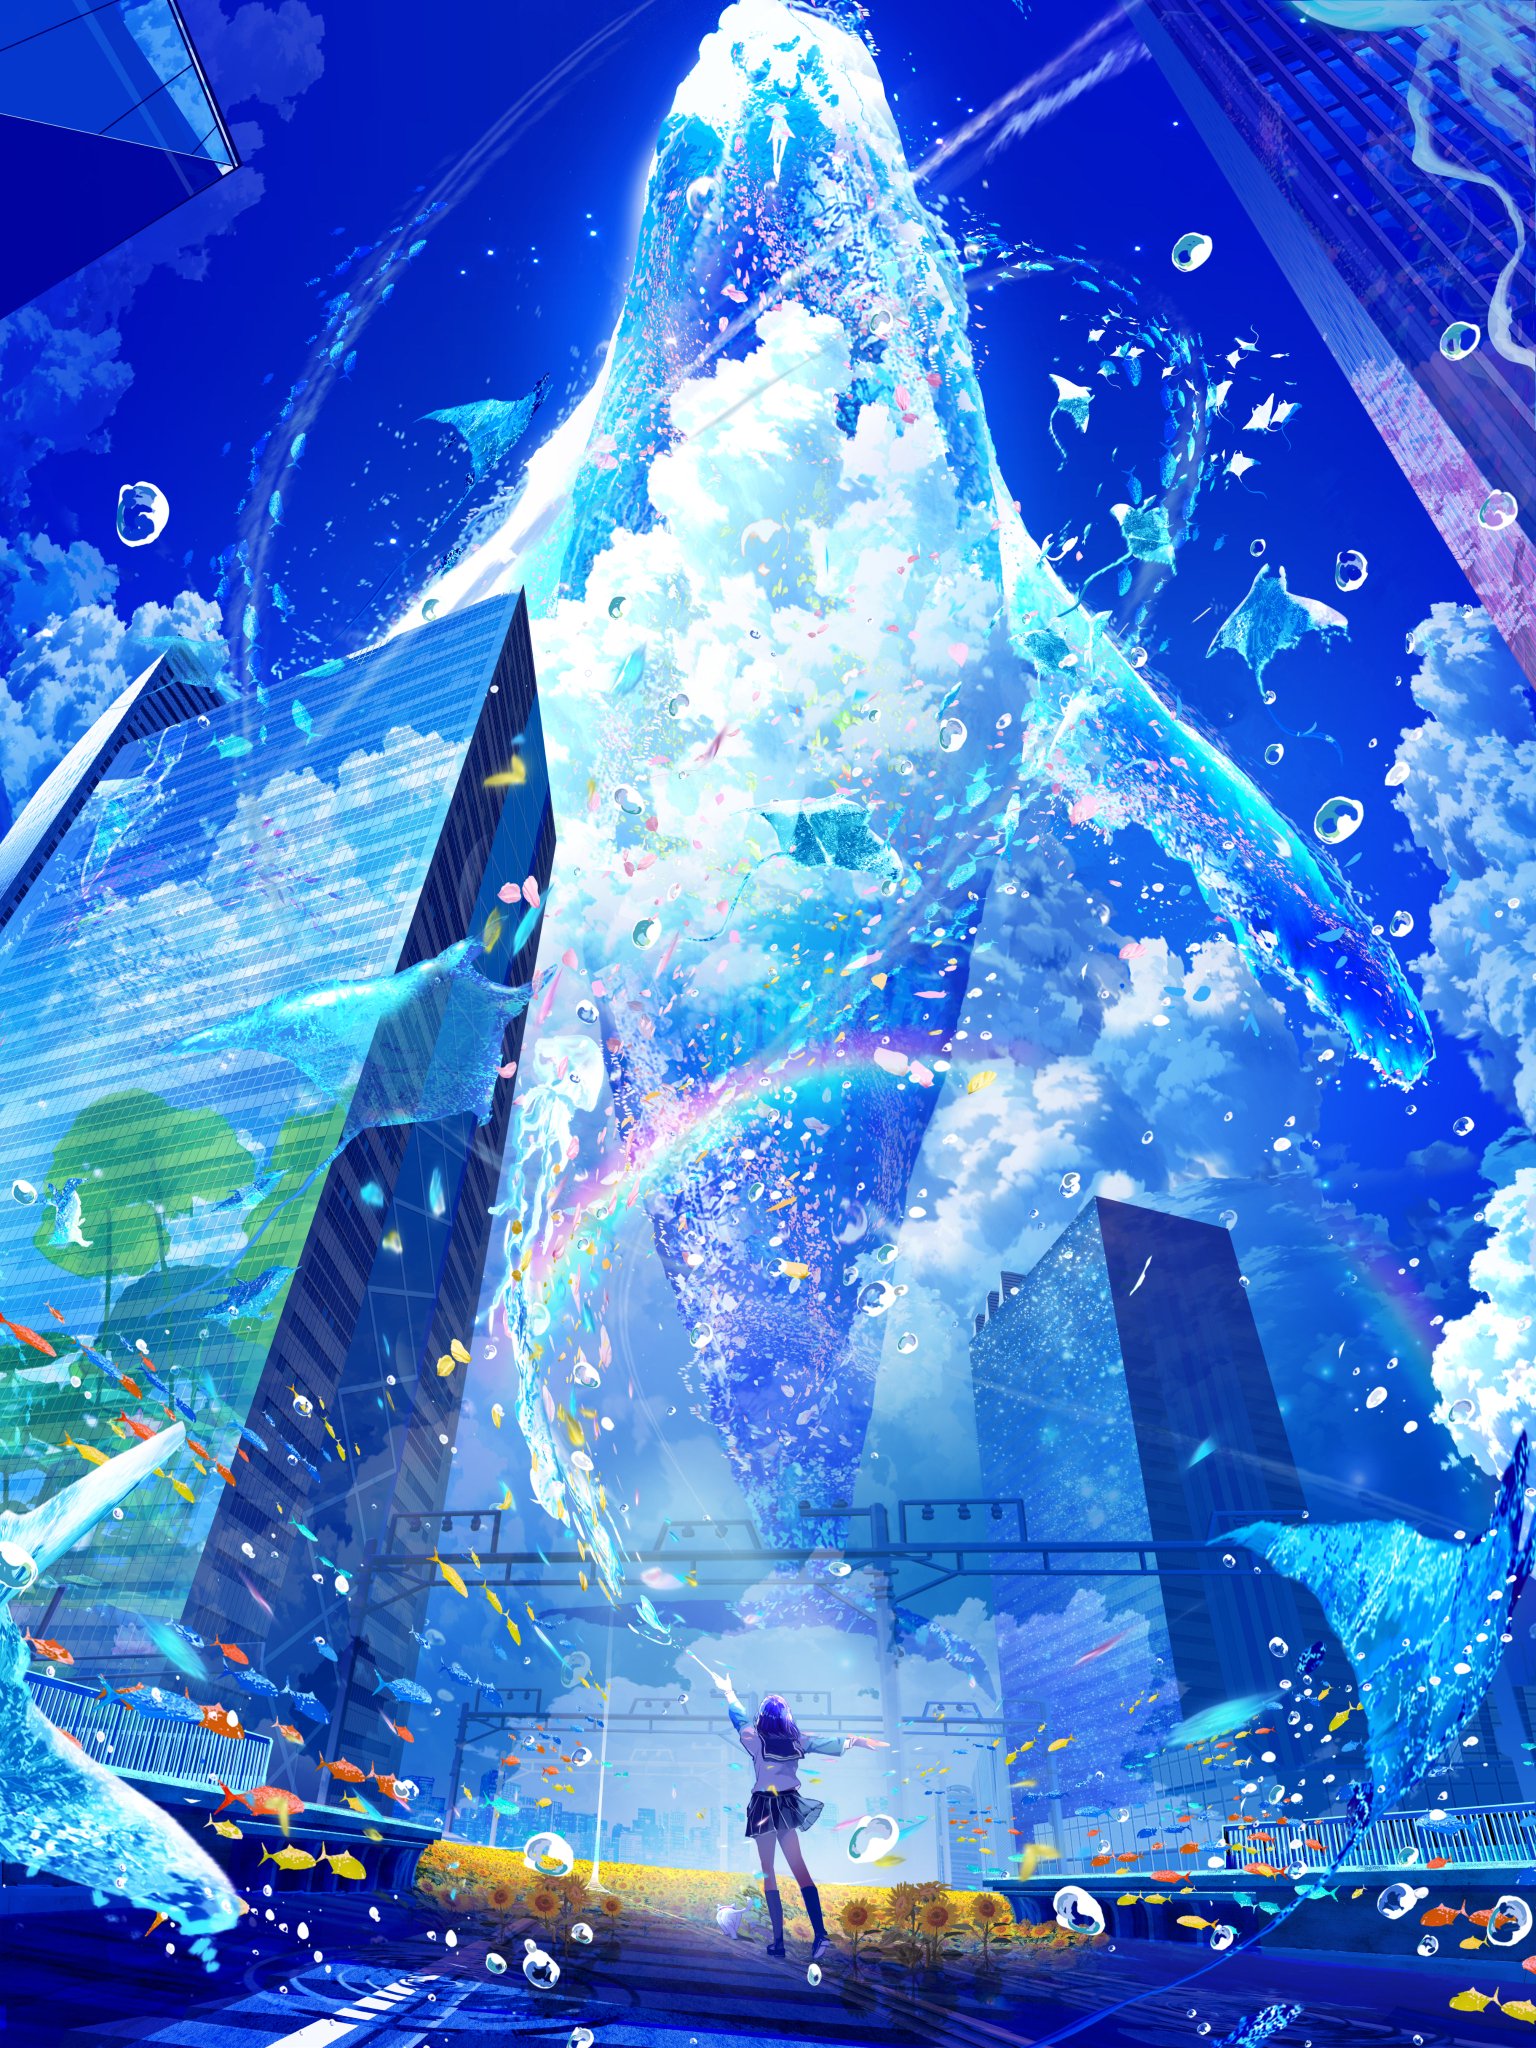 Anime 1536x2048 makoron117 cityscape city portrait display anime girls building schoolgirl school uniform cumulus rainbows water water drops clouds flying whales whale crosswalk bubbles sunflowers manta rays low-angle knee-highs petals street traffic lights fish animals